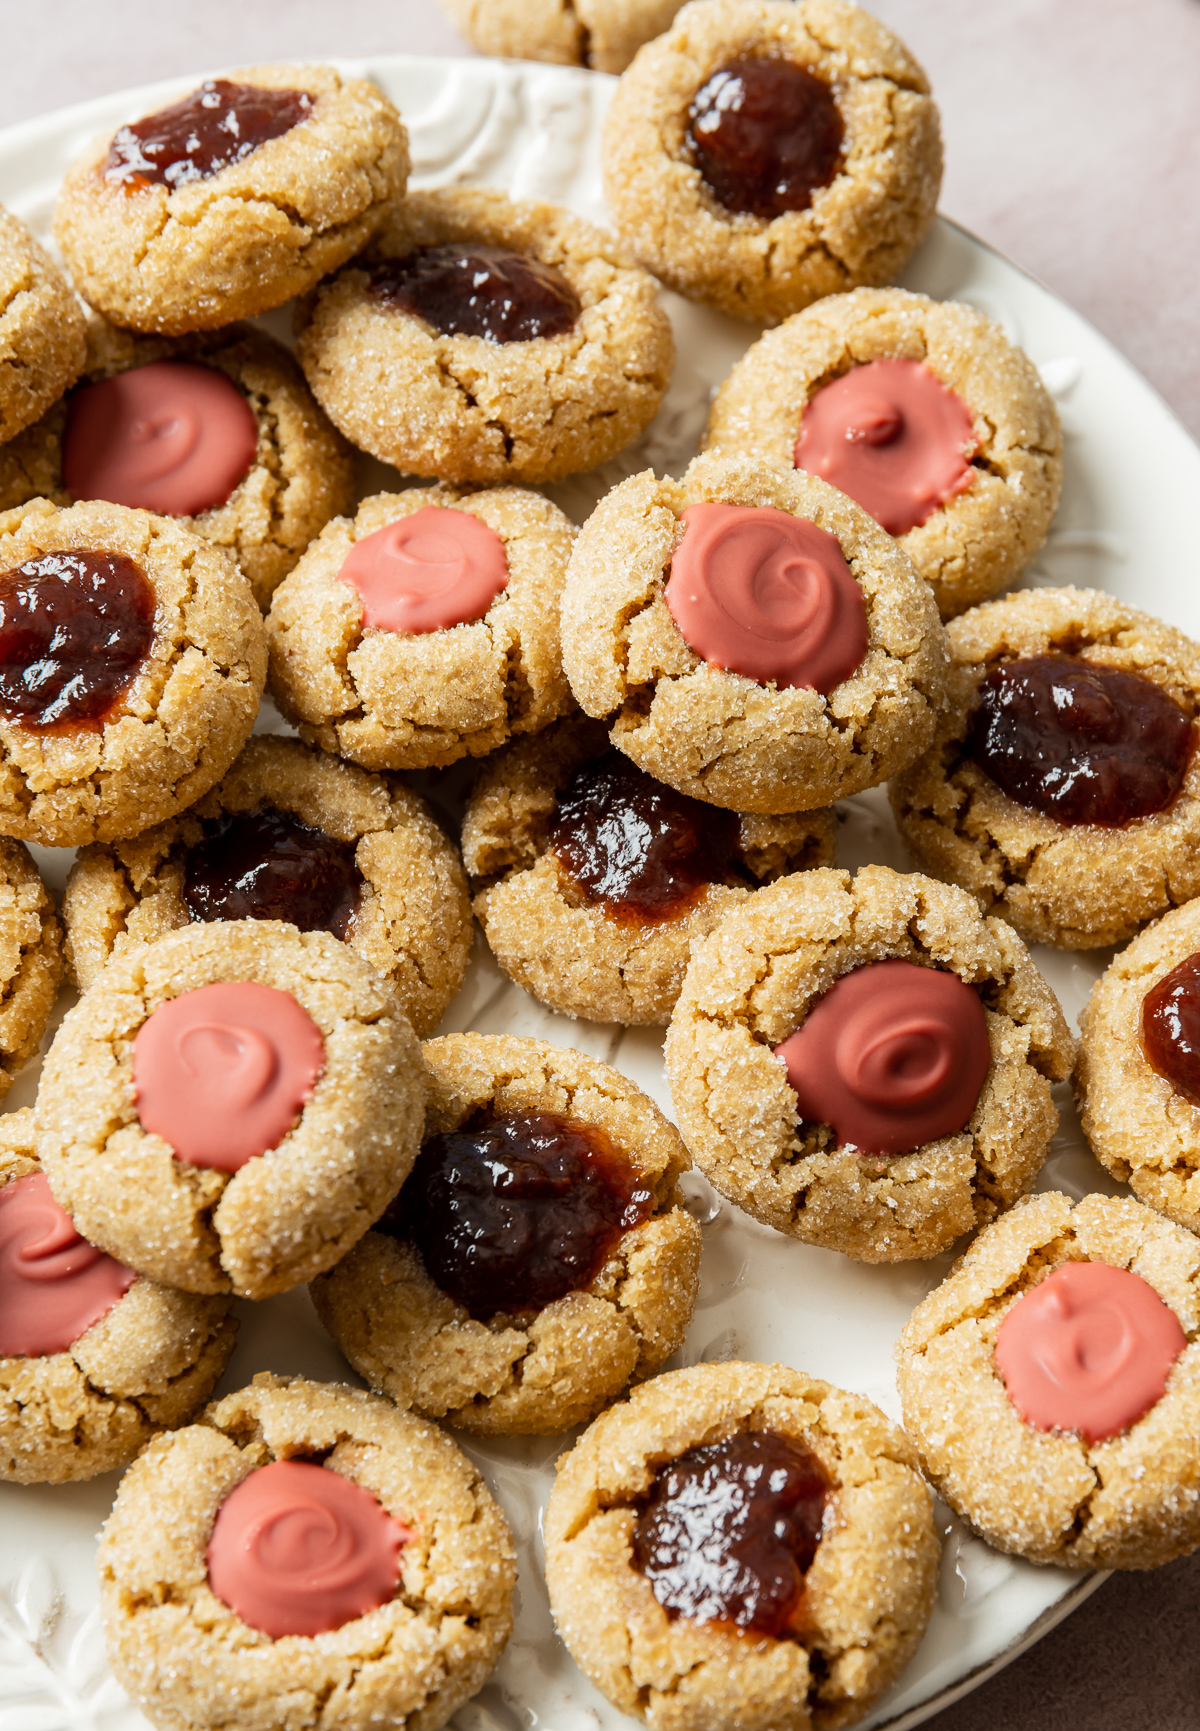 Peanut butter cookies filled with strawberry jelly and strawberry chocolate on a white plate